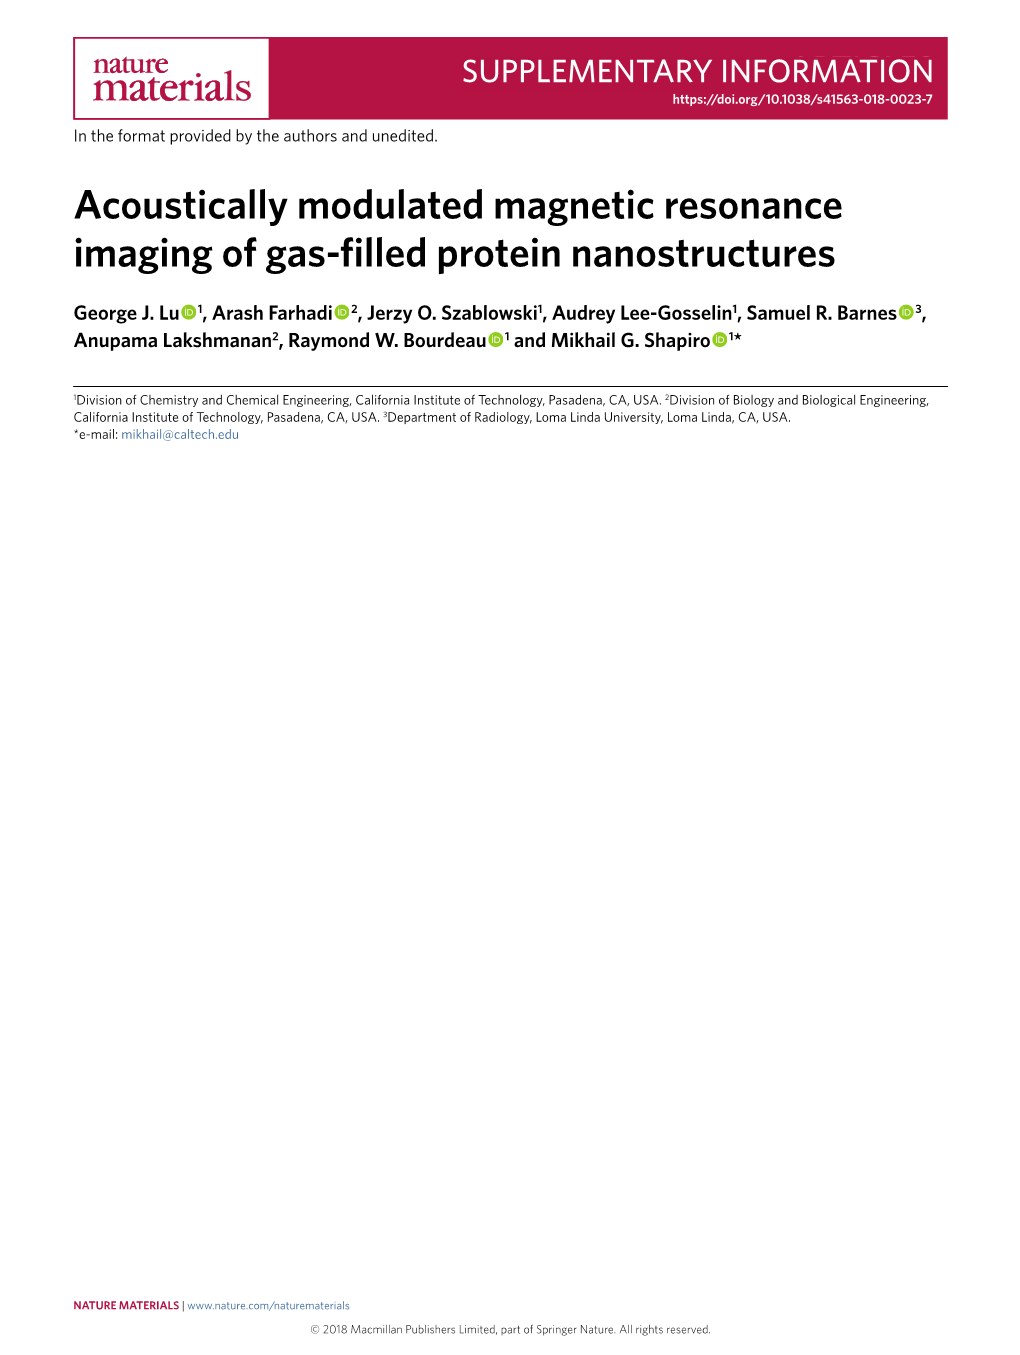 Acoustically Modulated Magnetic Resonance Imaging of Gas-Filled Protein Nanostructures